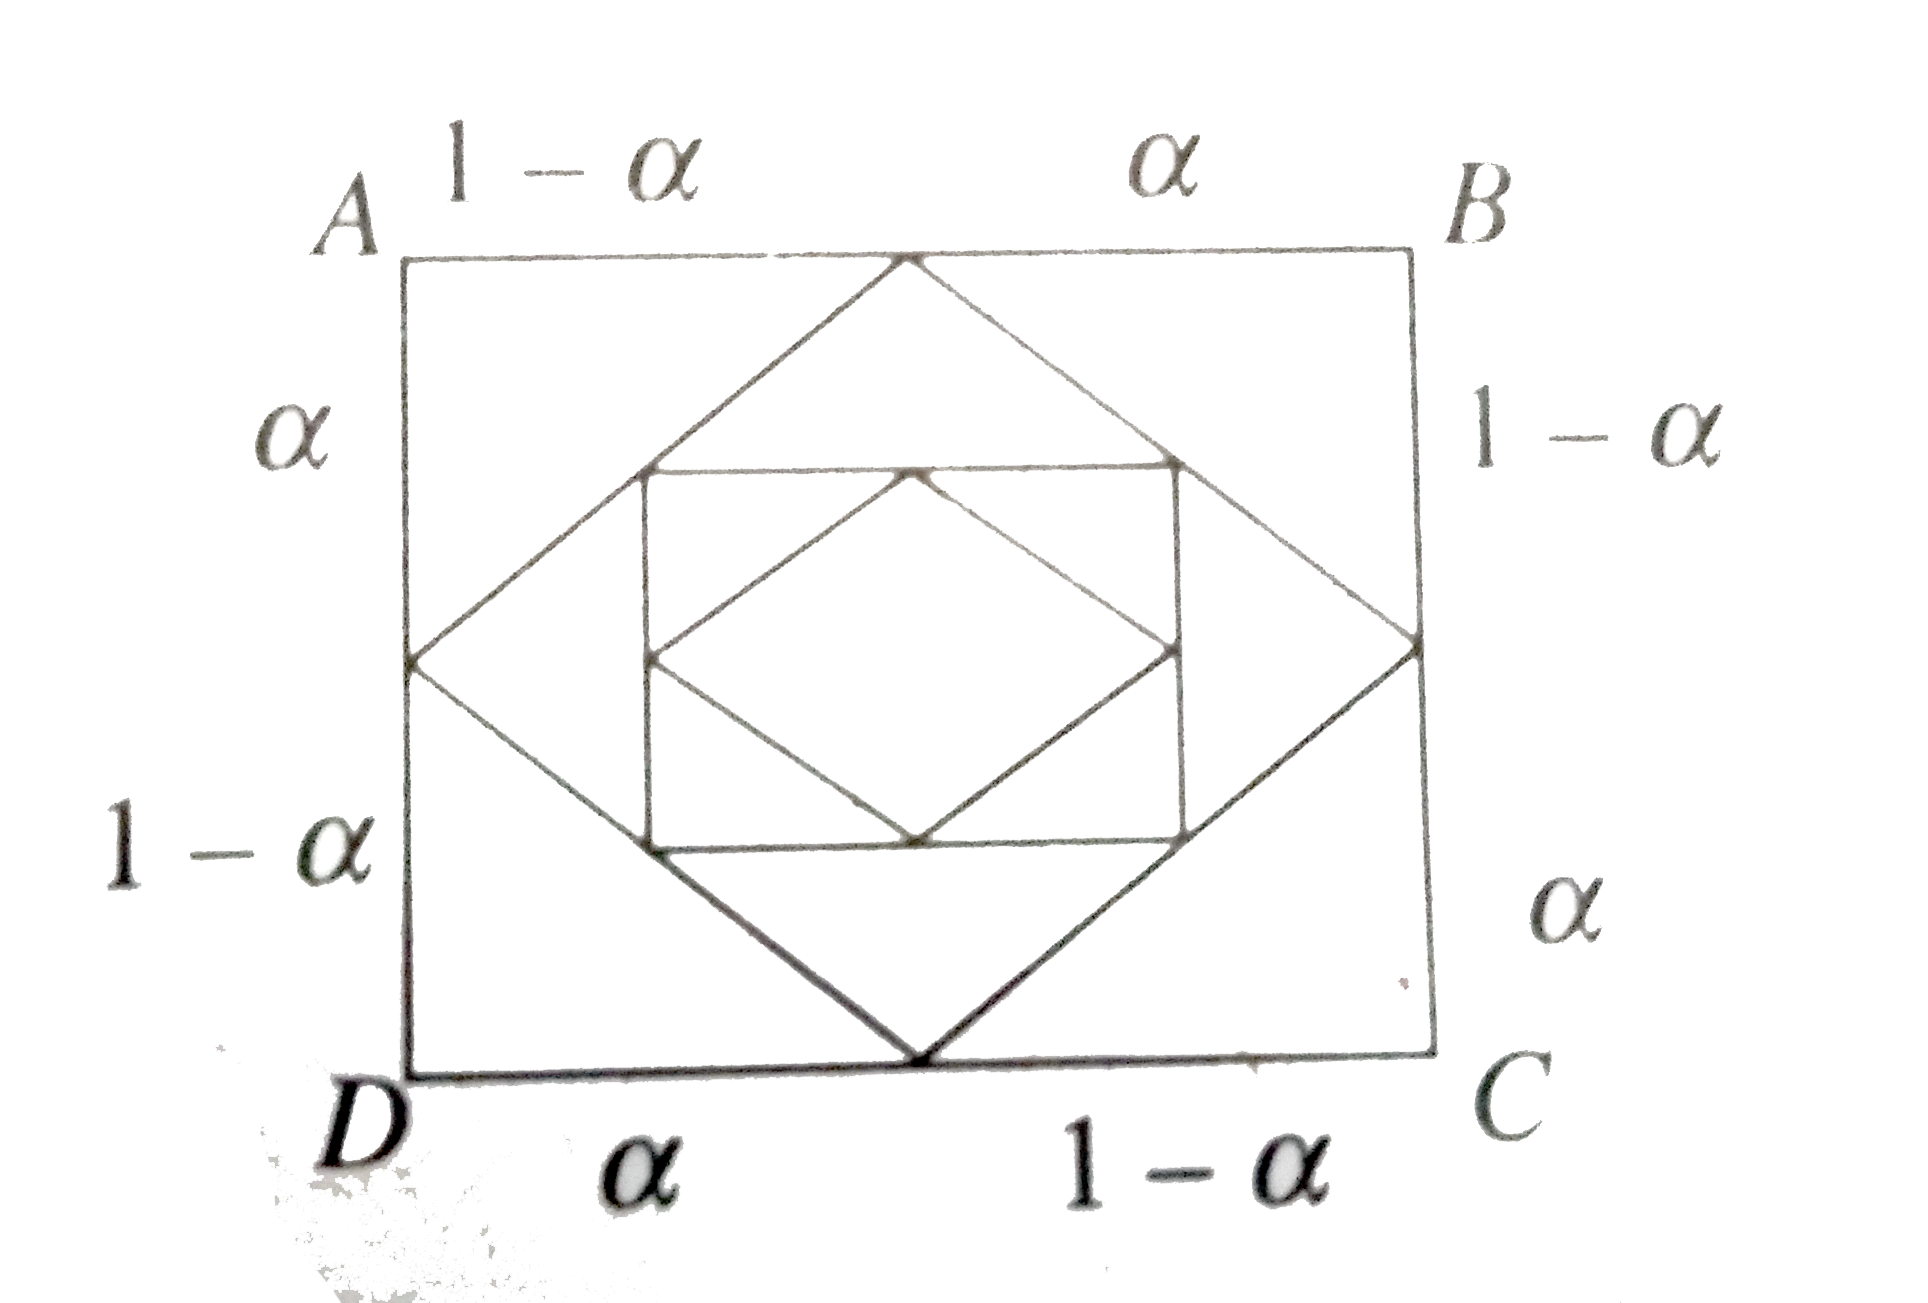 Let ABCD is a unit square and each side of the square is divided in the ratio alpha : (1-alpha) (0 lt alpha lt 1) . These points are connected to obtain another square. The sides of new square are divided in the ratio alpha : (1-alpha) and points are joined to obtain another square. The process is continued idefinitely. Let a(n) denote the length of side and A(n) the area of the n^(th) square   The value of alpha for which sum(n=1)^(oo)A(n)=(8)/(3) is/are